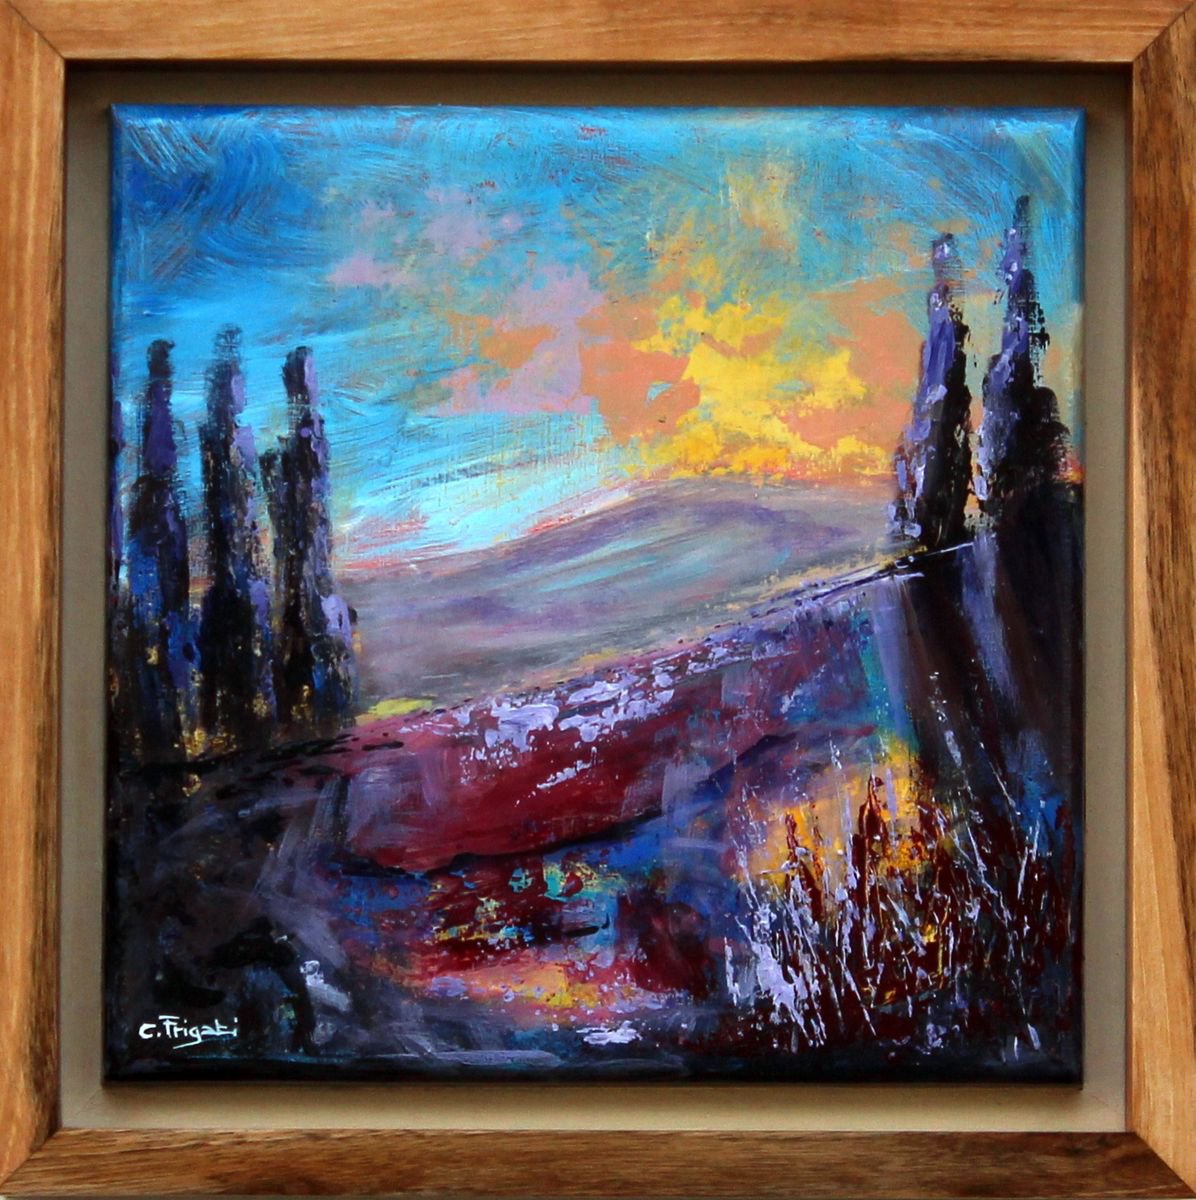 Lost In Thoughts #10 - Framed Semi Abstract Landscape by Cecilia Frigati